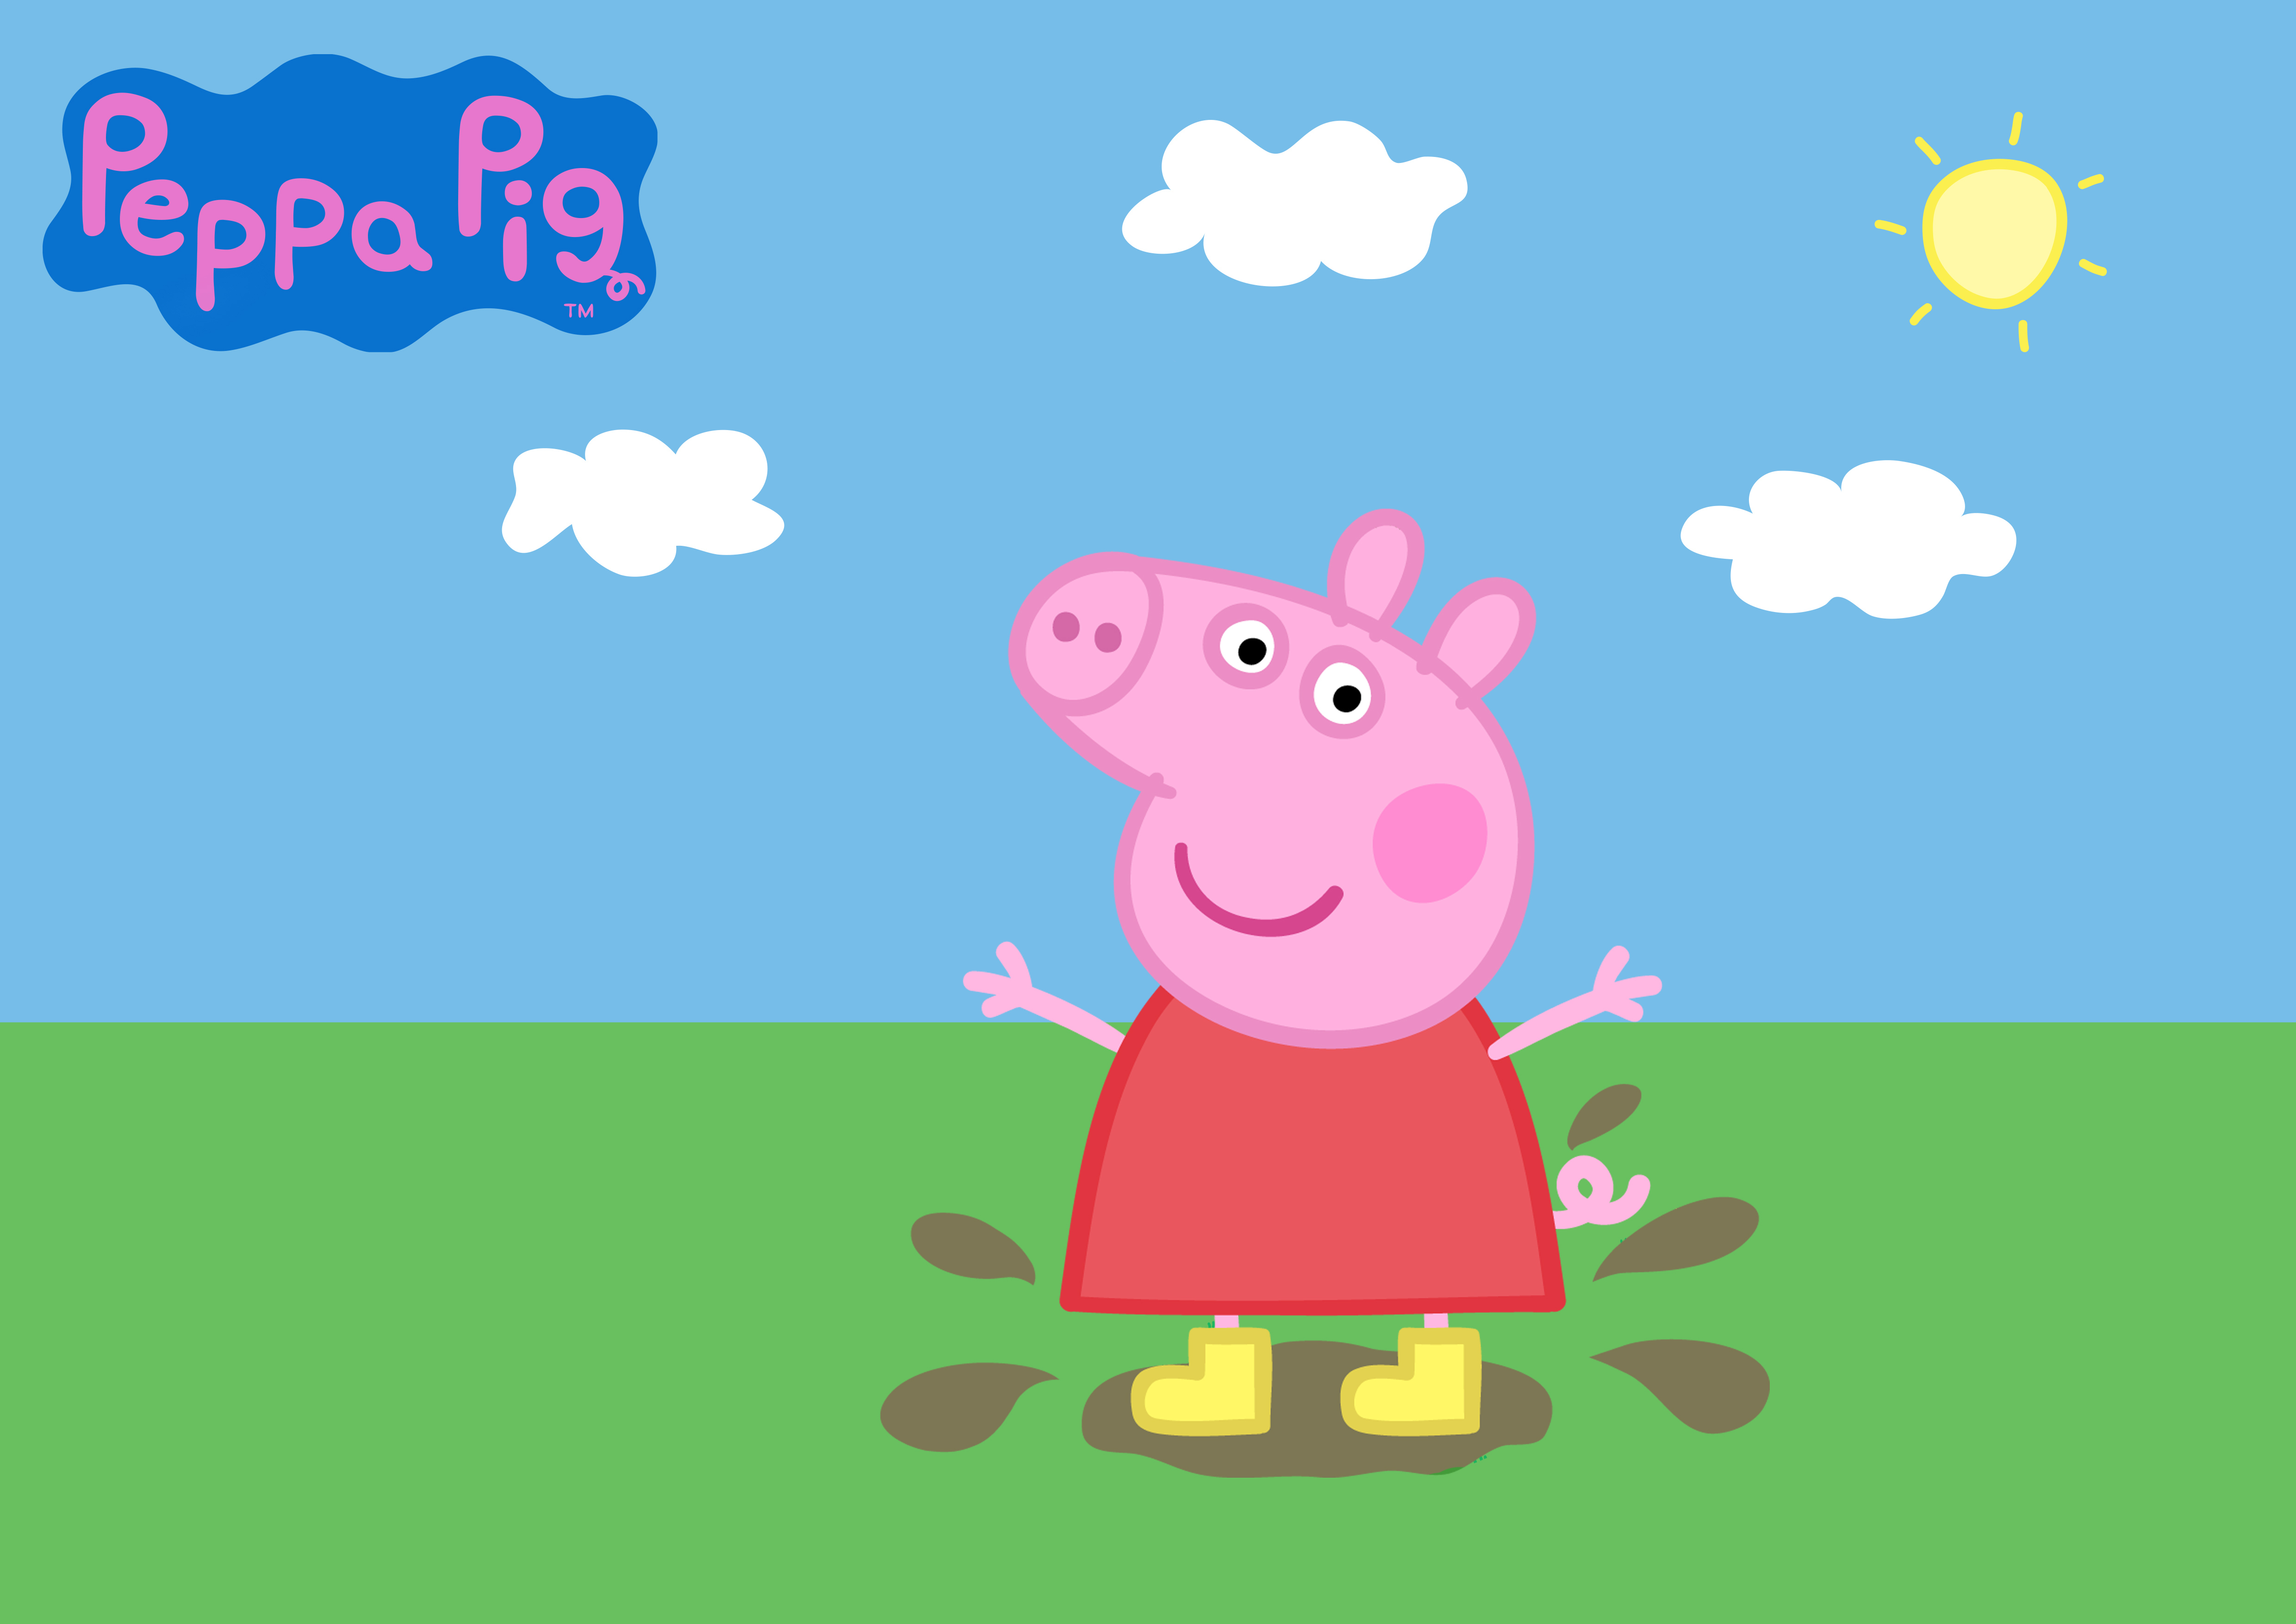 Peppa Pig is one of the few popular children's shows on Noggin